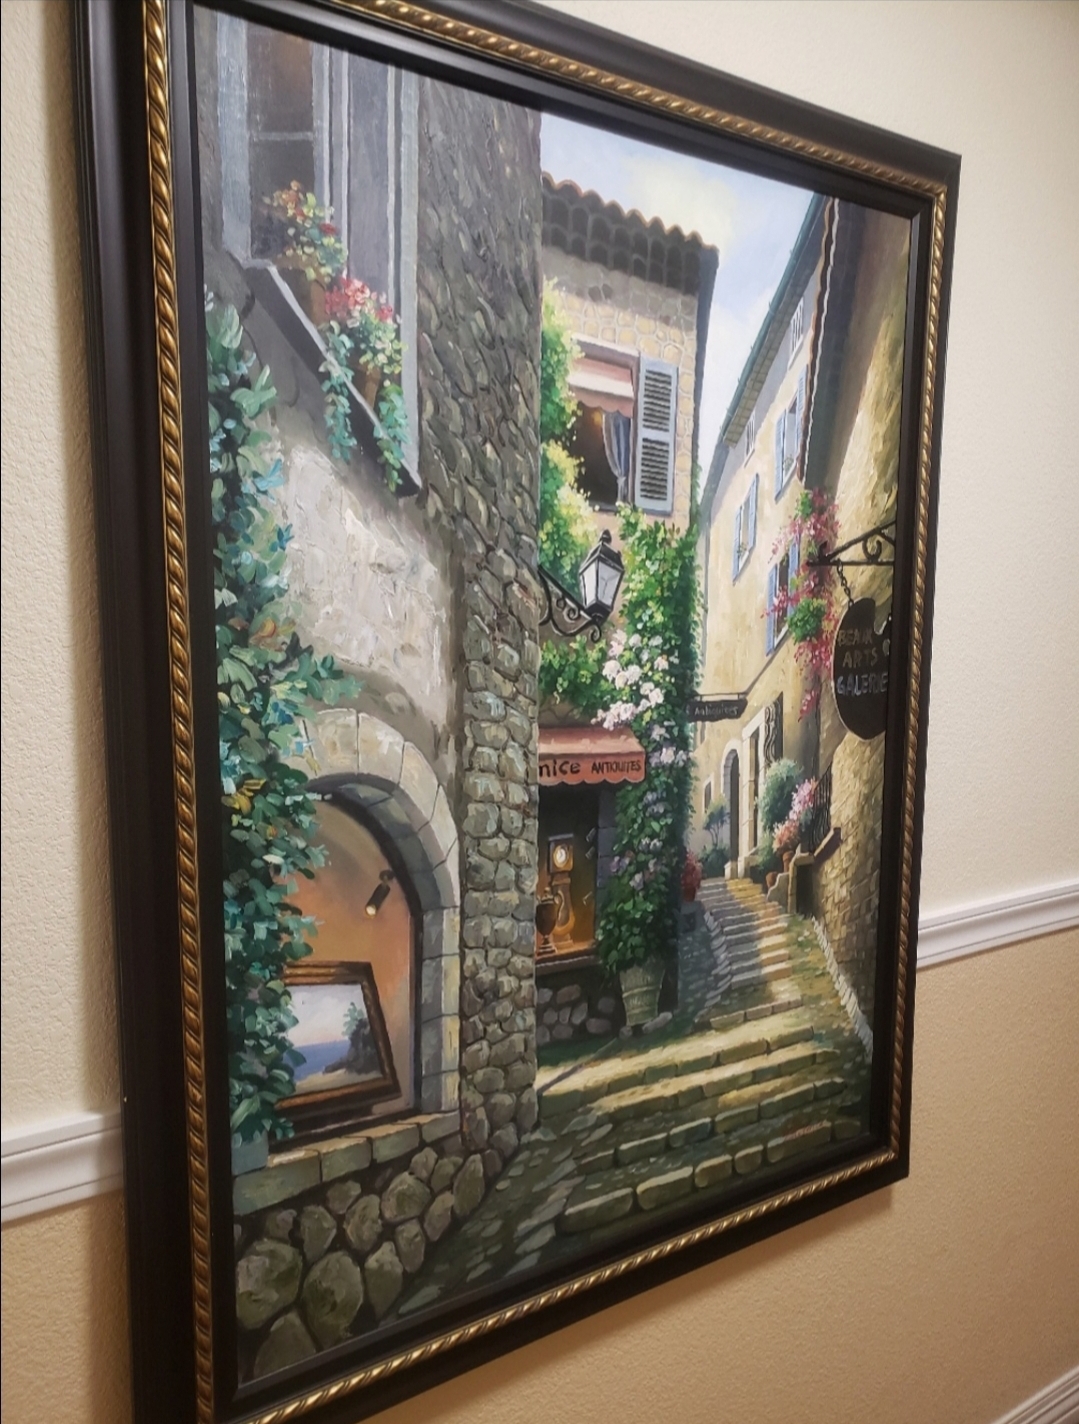 A painting of a house with stairs going up the side.